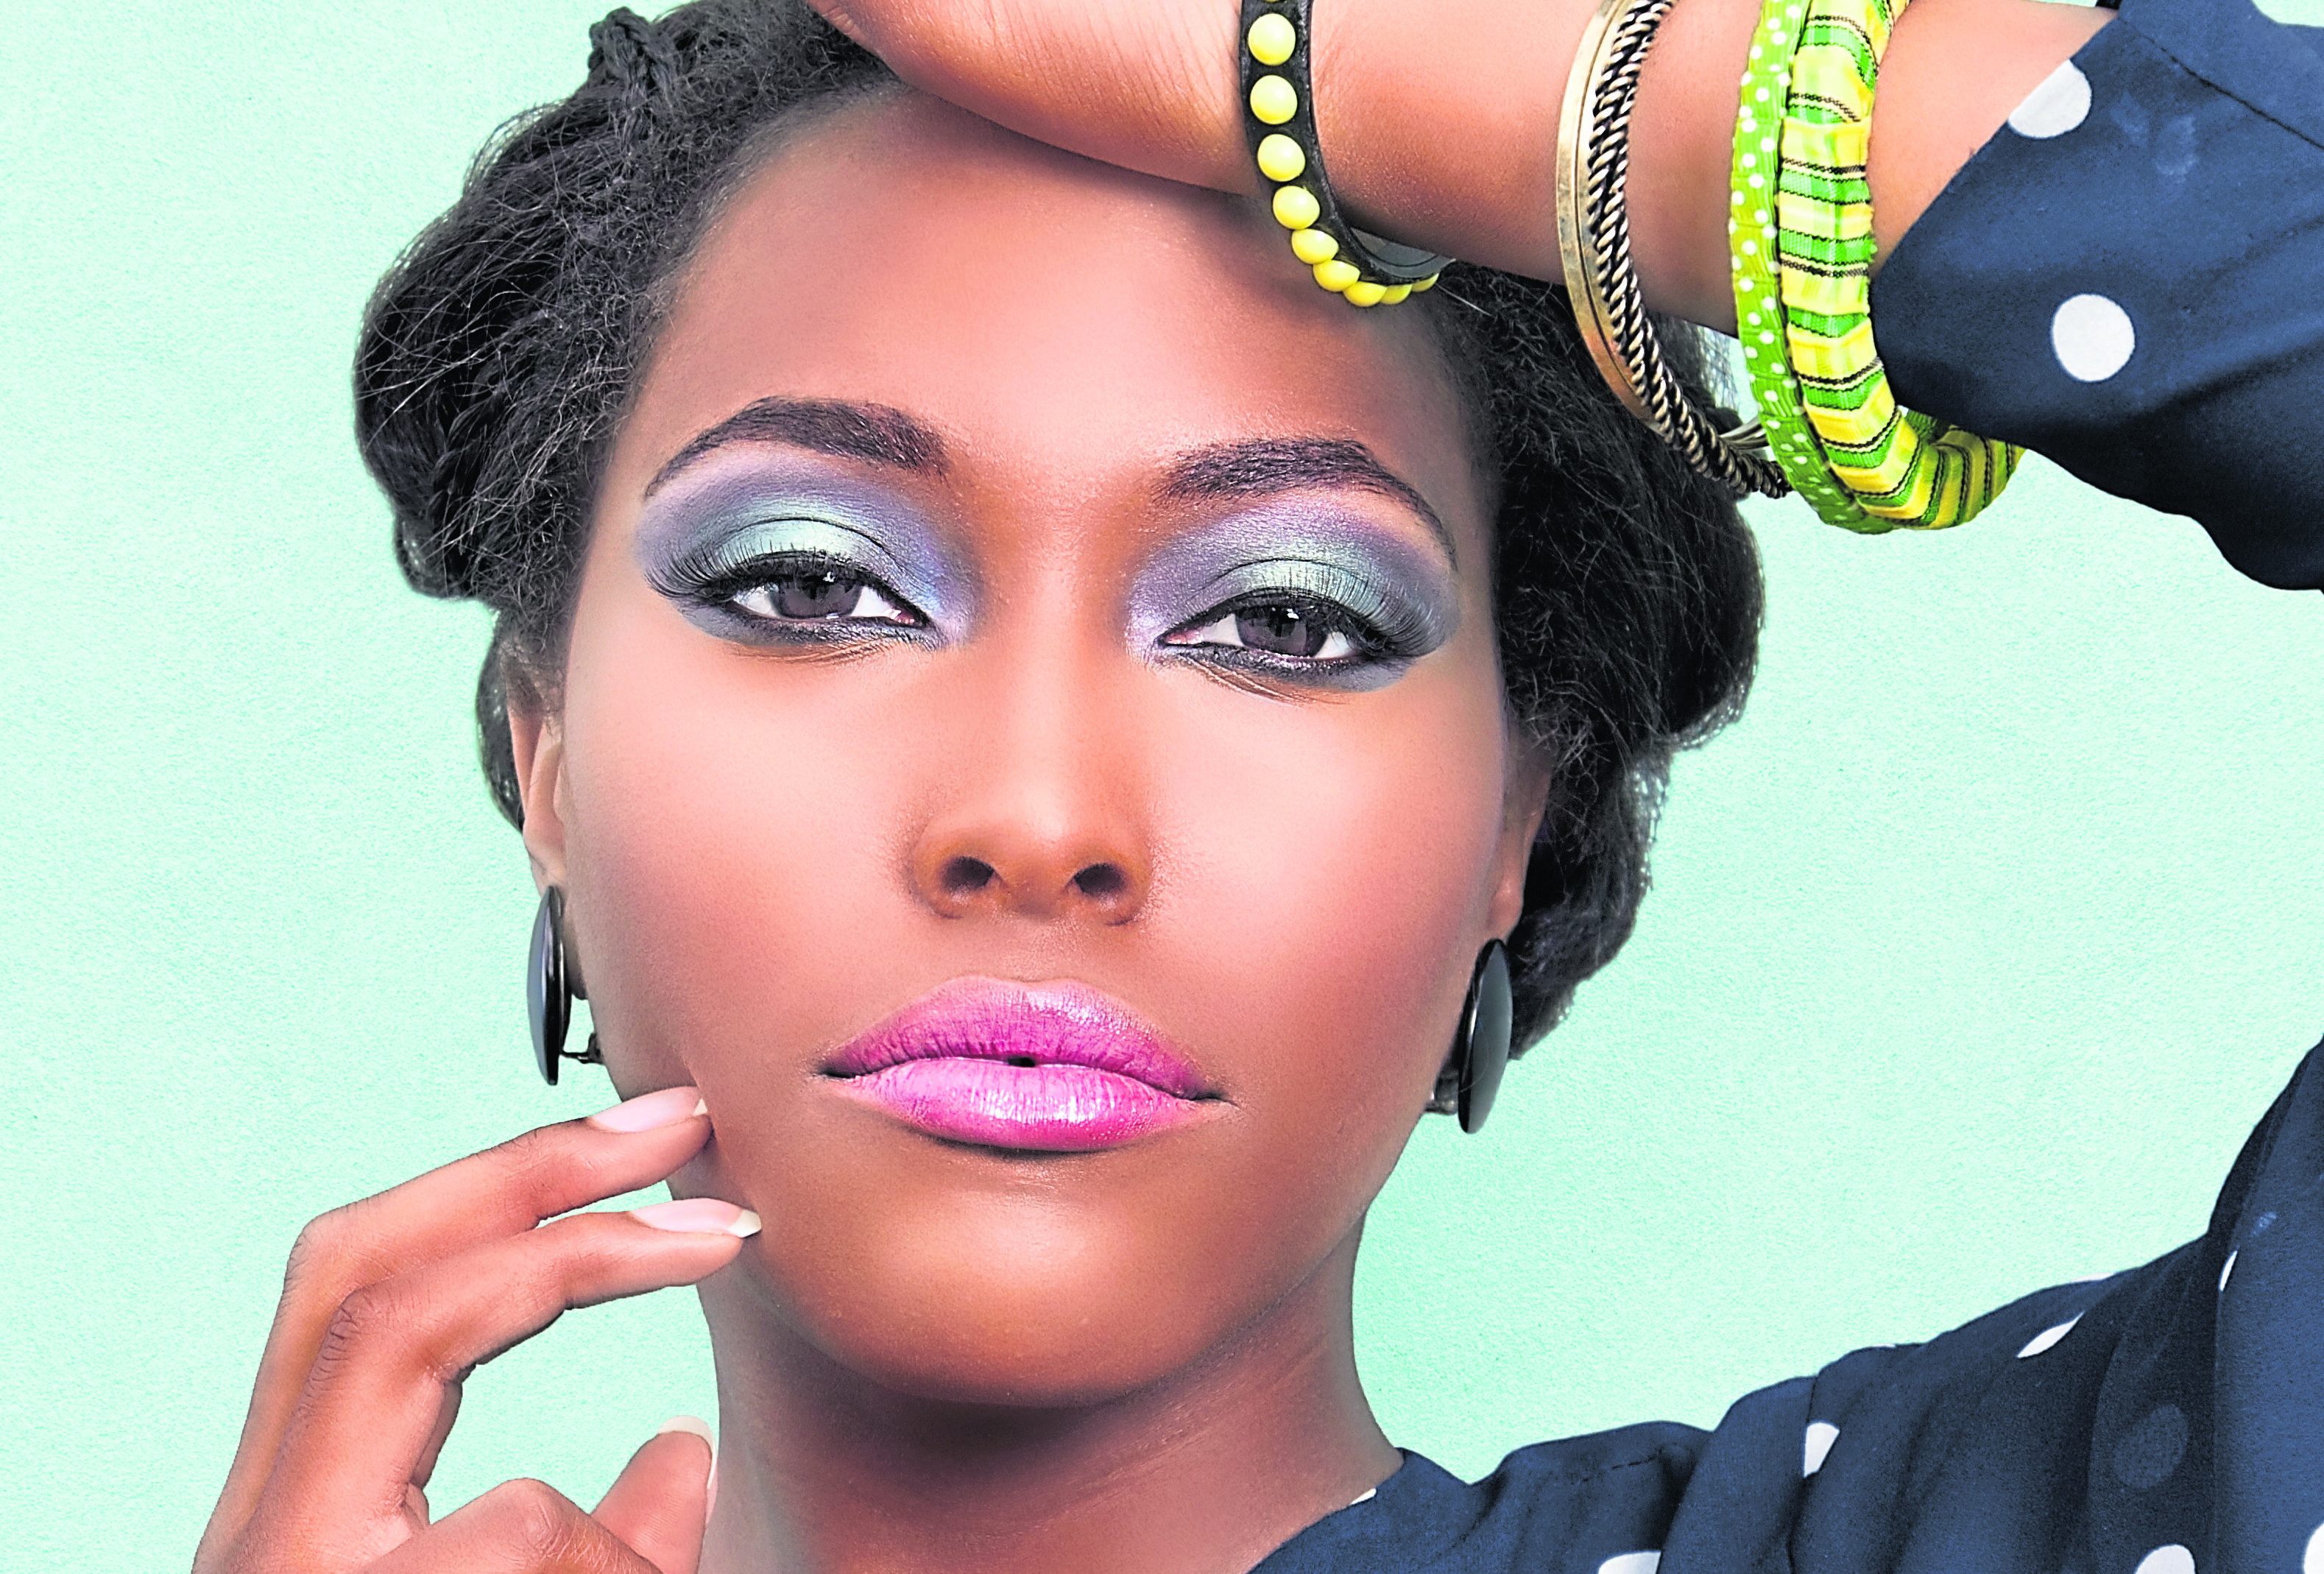 Smoky or colourful eyes are this season’s look